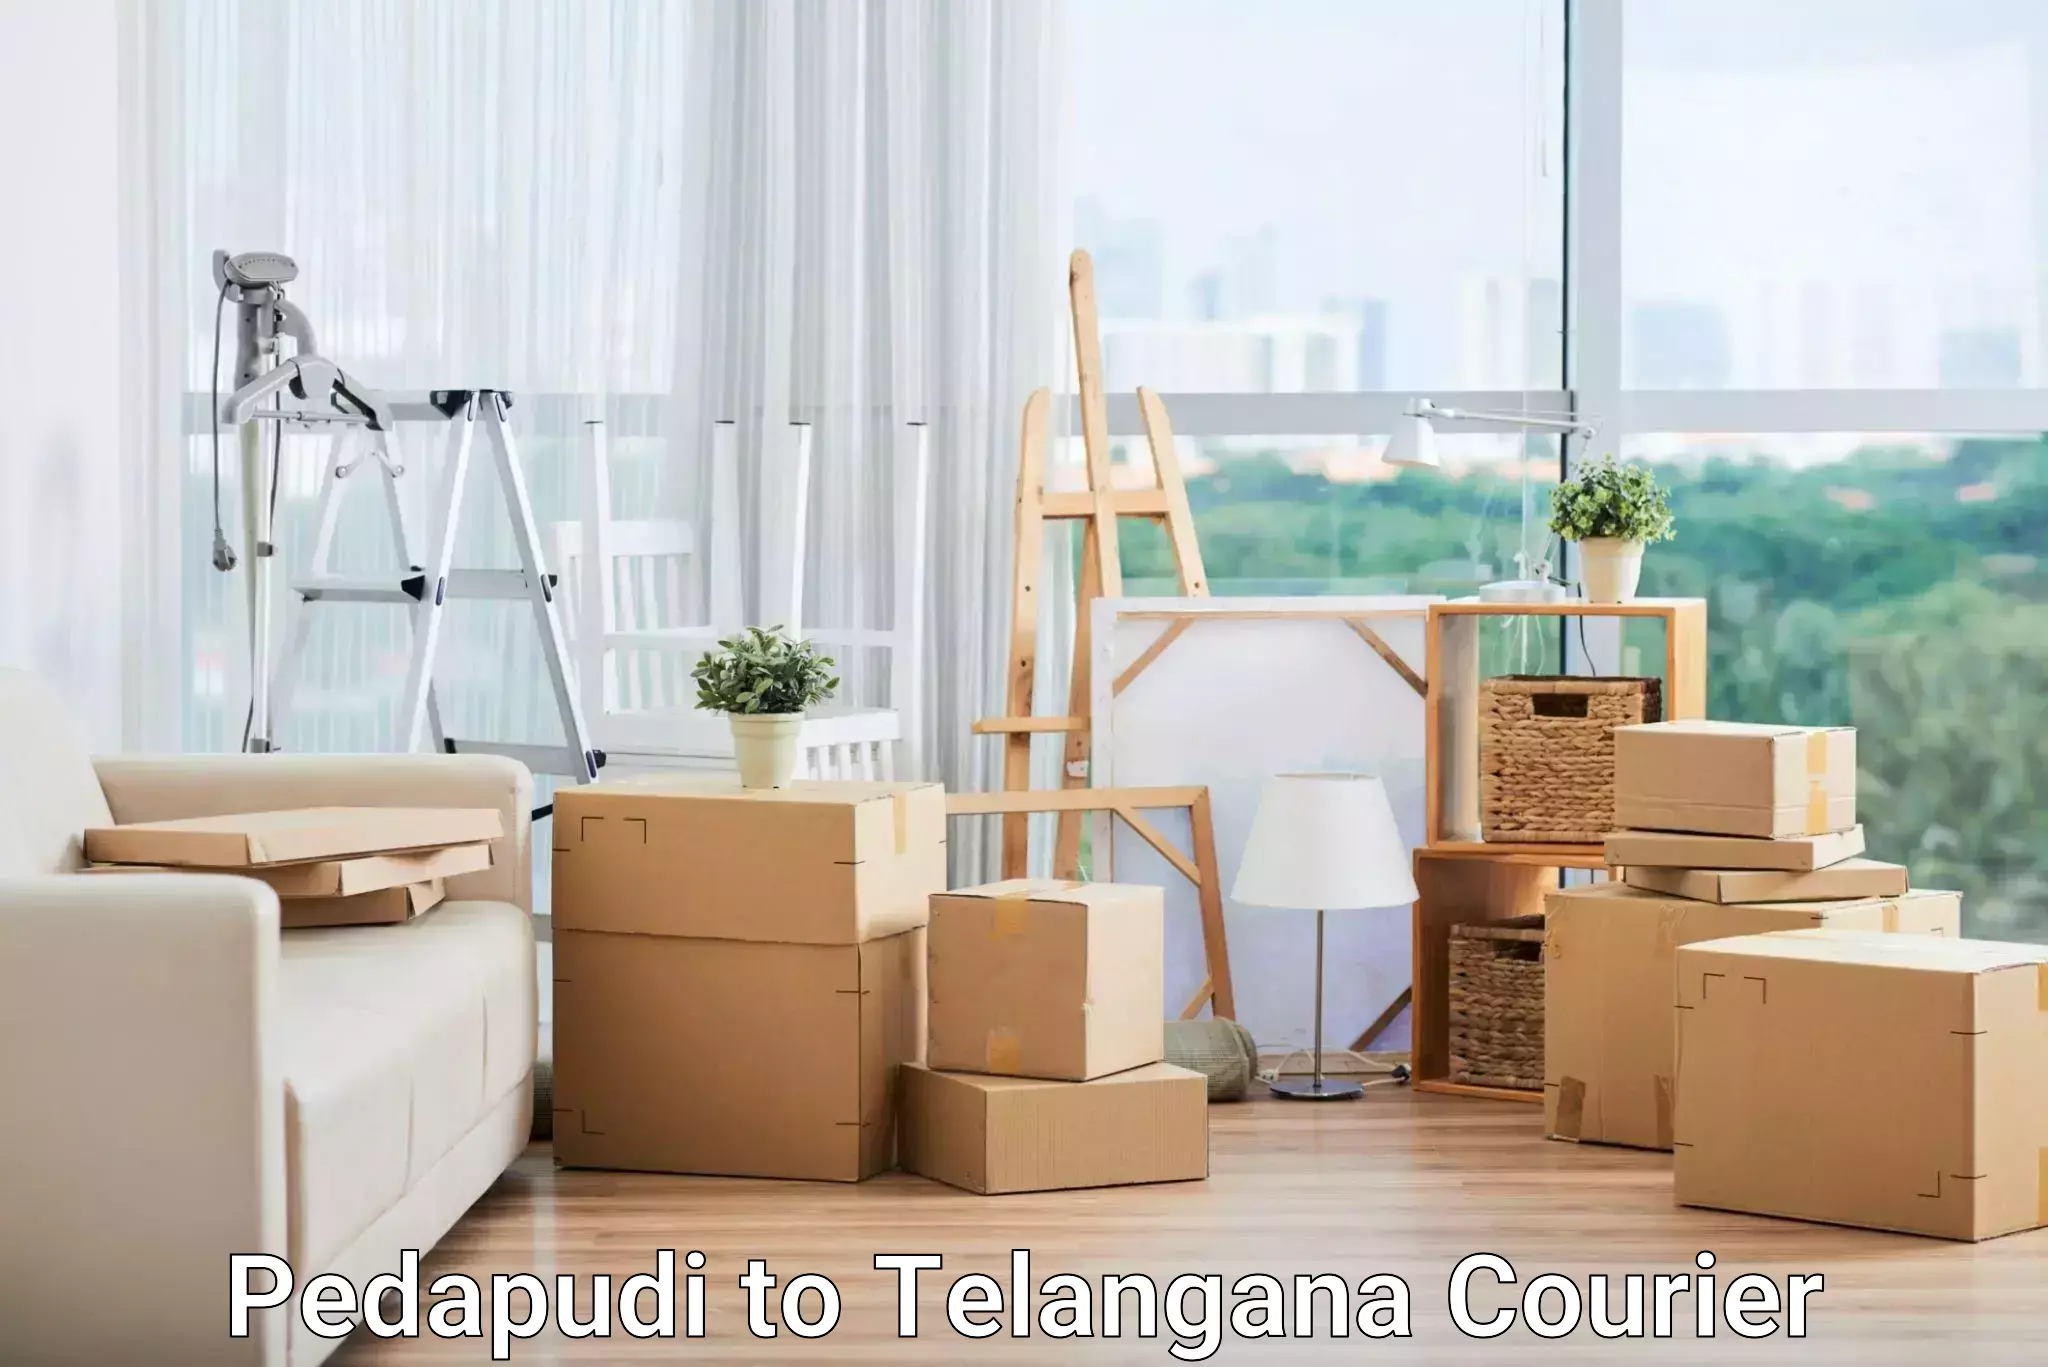 Rural area delivery in Pedapudi to Warangal